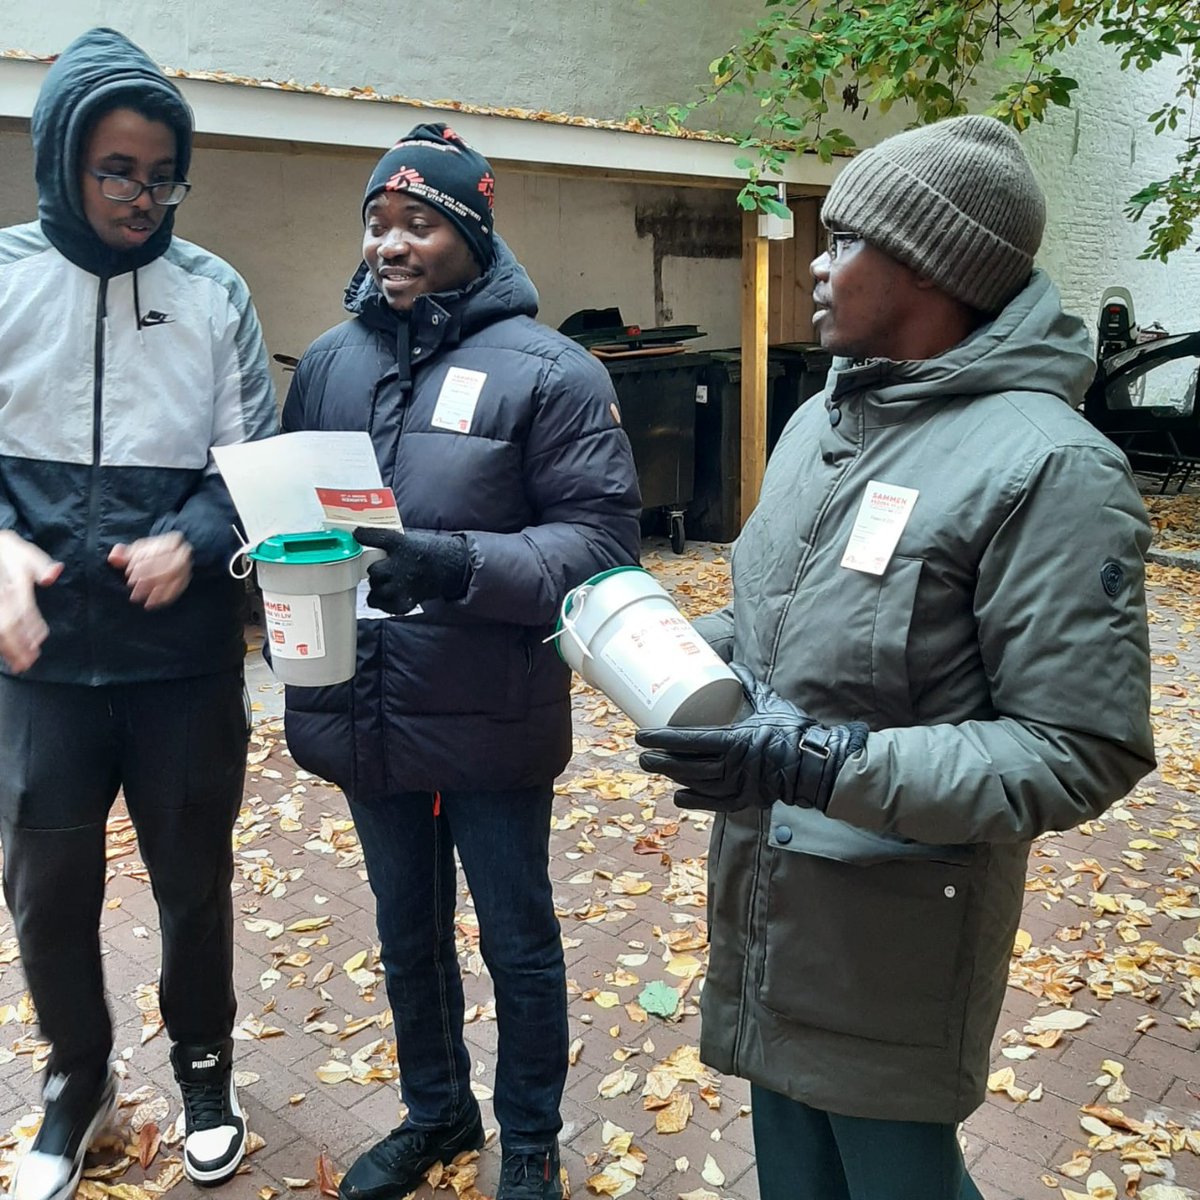 Luke, a nurse & former #leishmaniasis patient from Kacheliba 🇰🇪 this week participated in the #TVaksjonen fundraising campaign in Norway. This year, donations will go to support the work of @DNDi and @msfnorge. NOK 266 million was raised through the campaign. #beatNTDs